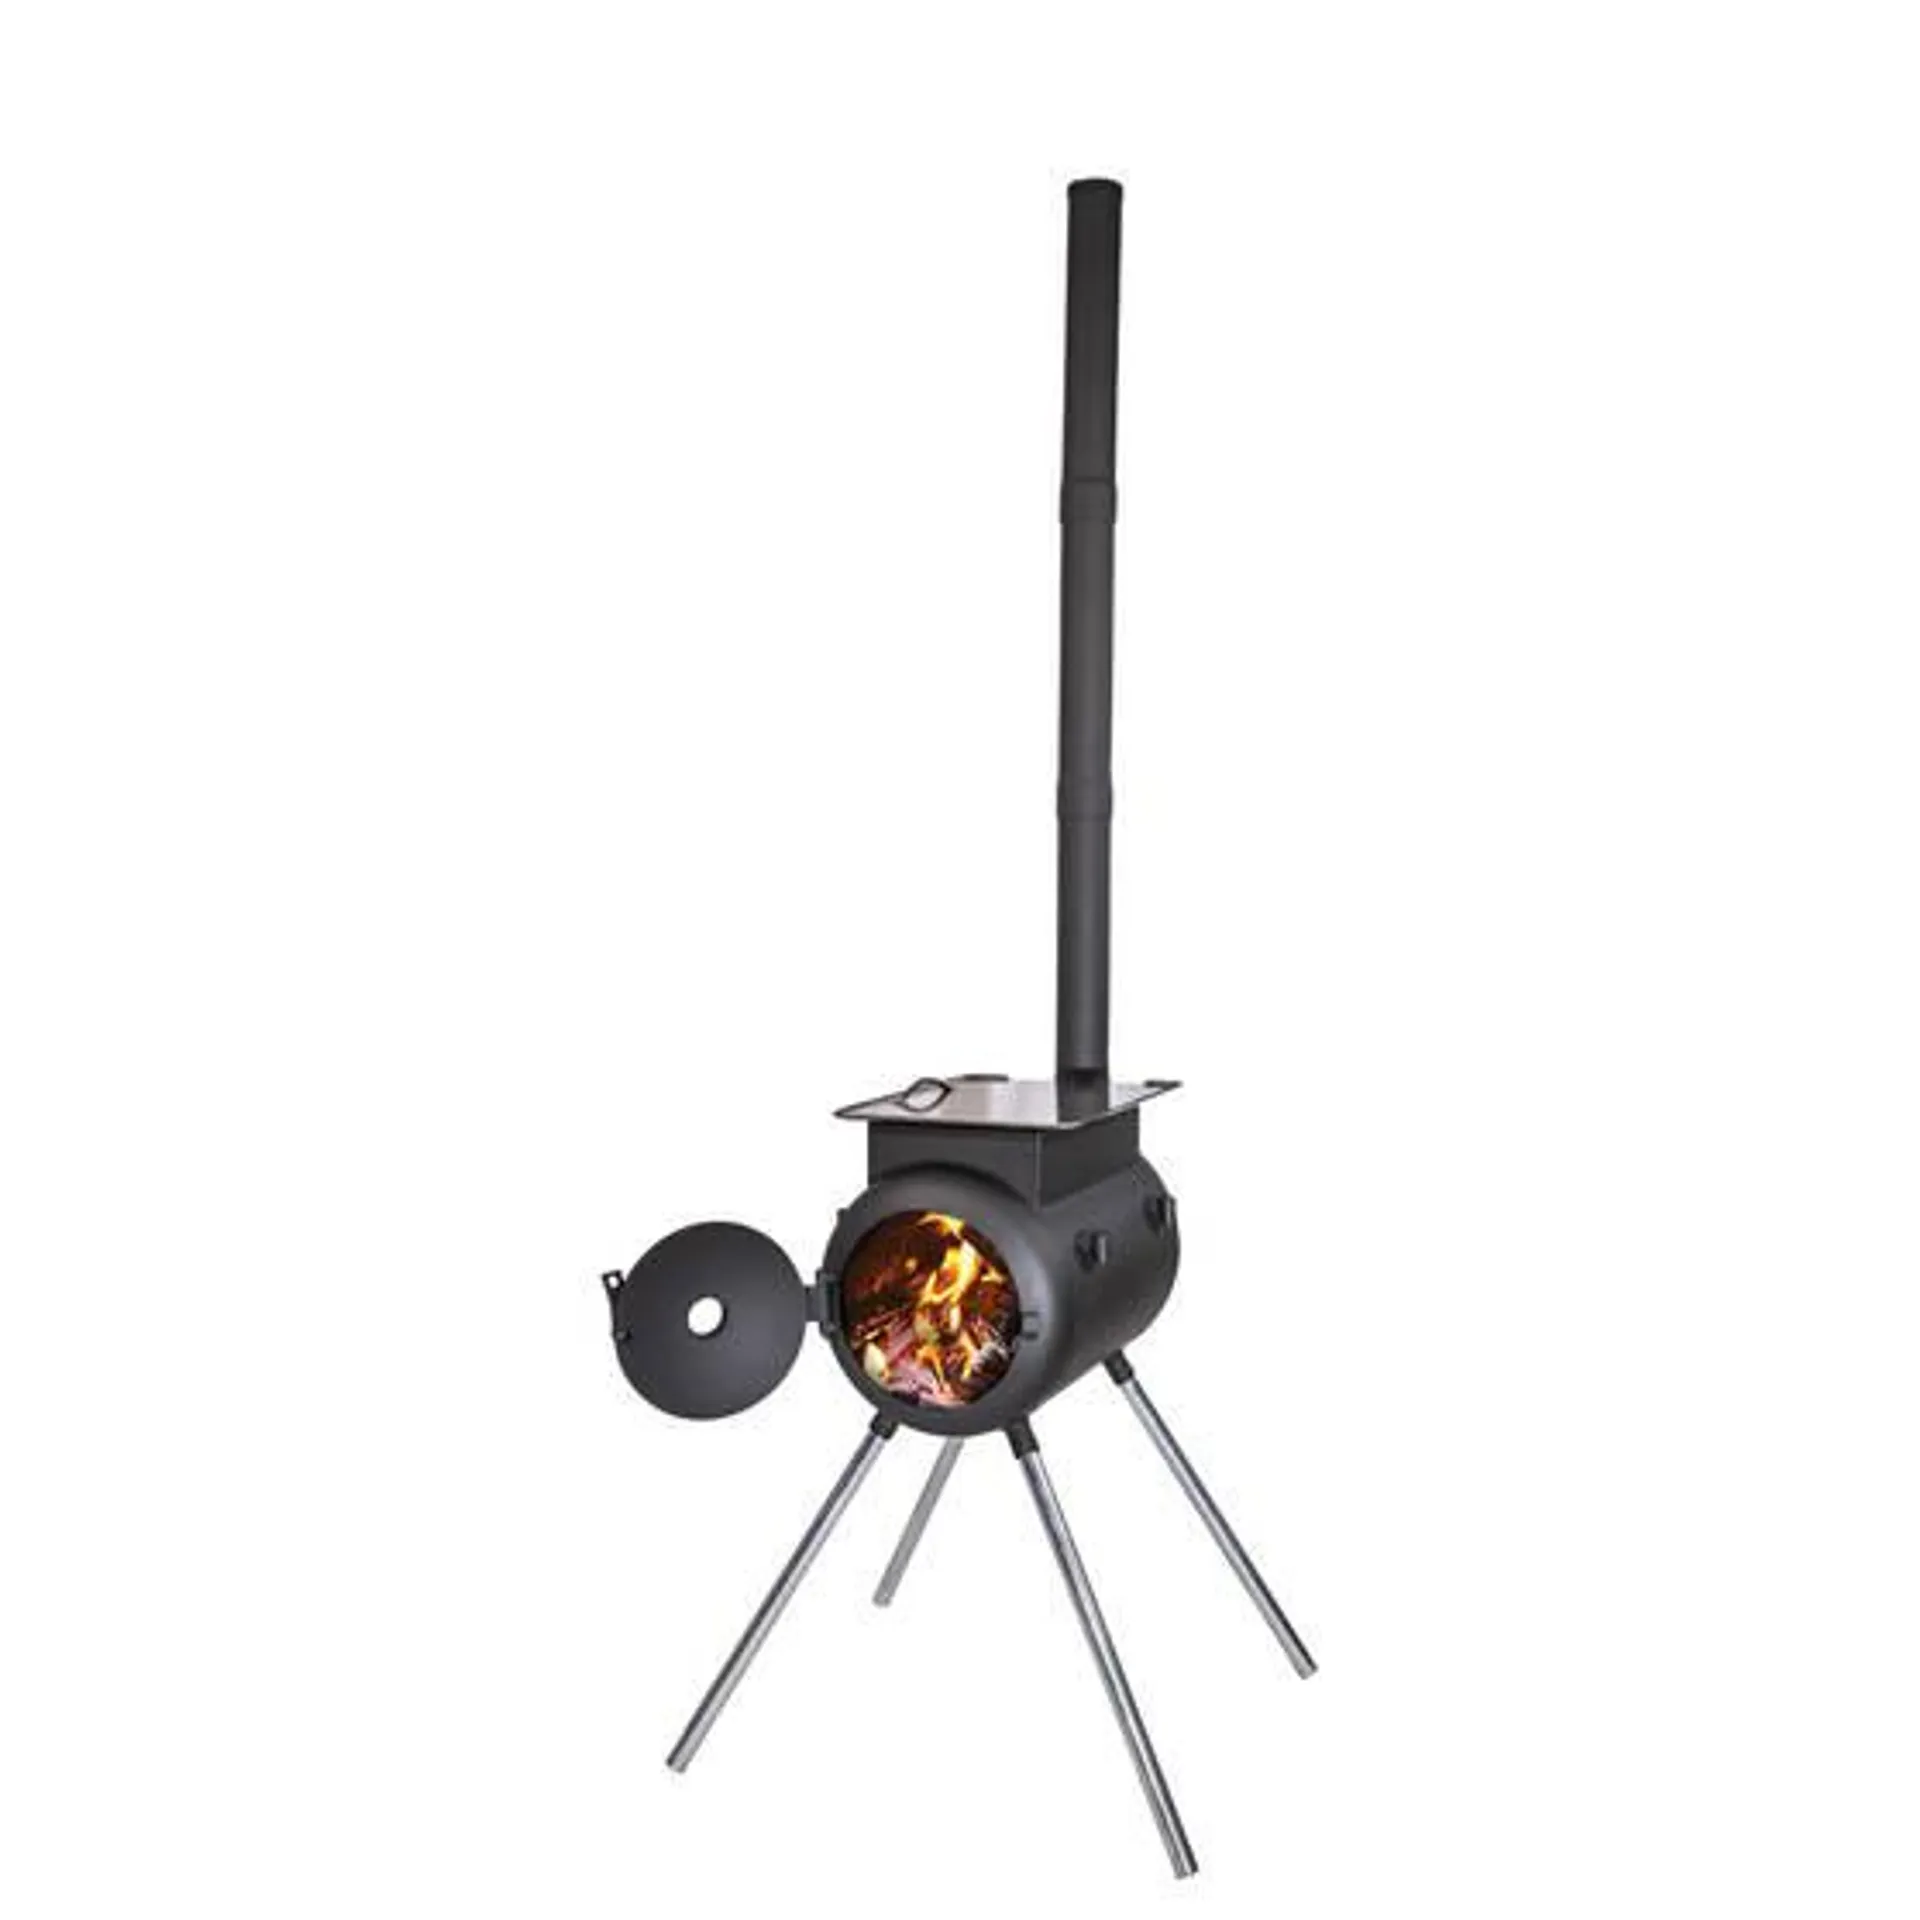 Ozpig Traveller Wood Fired Stove